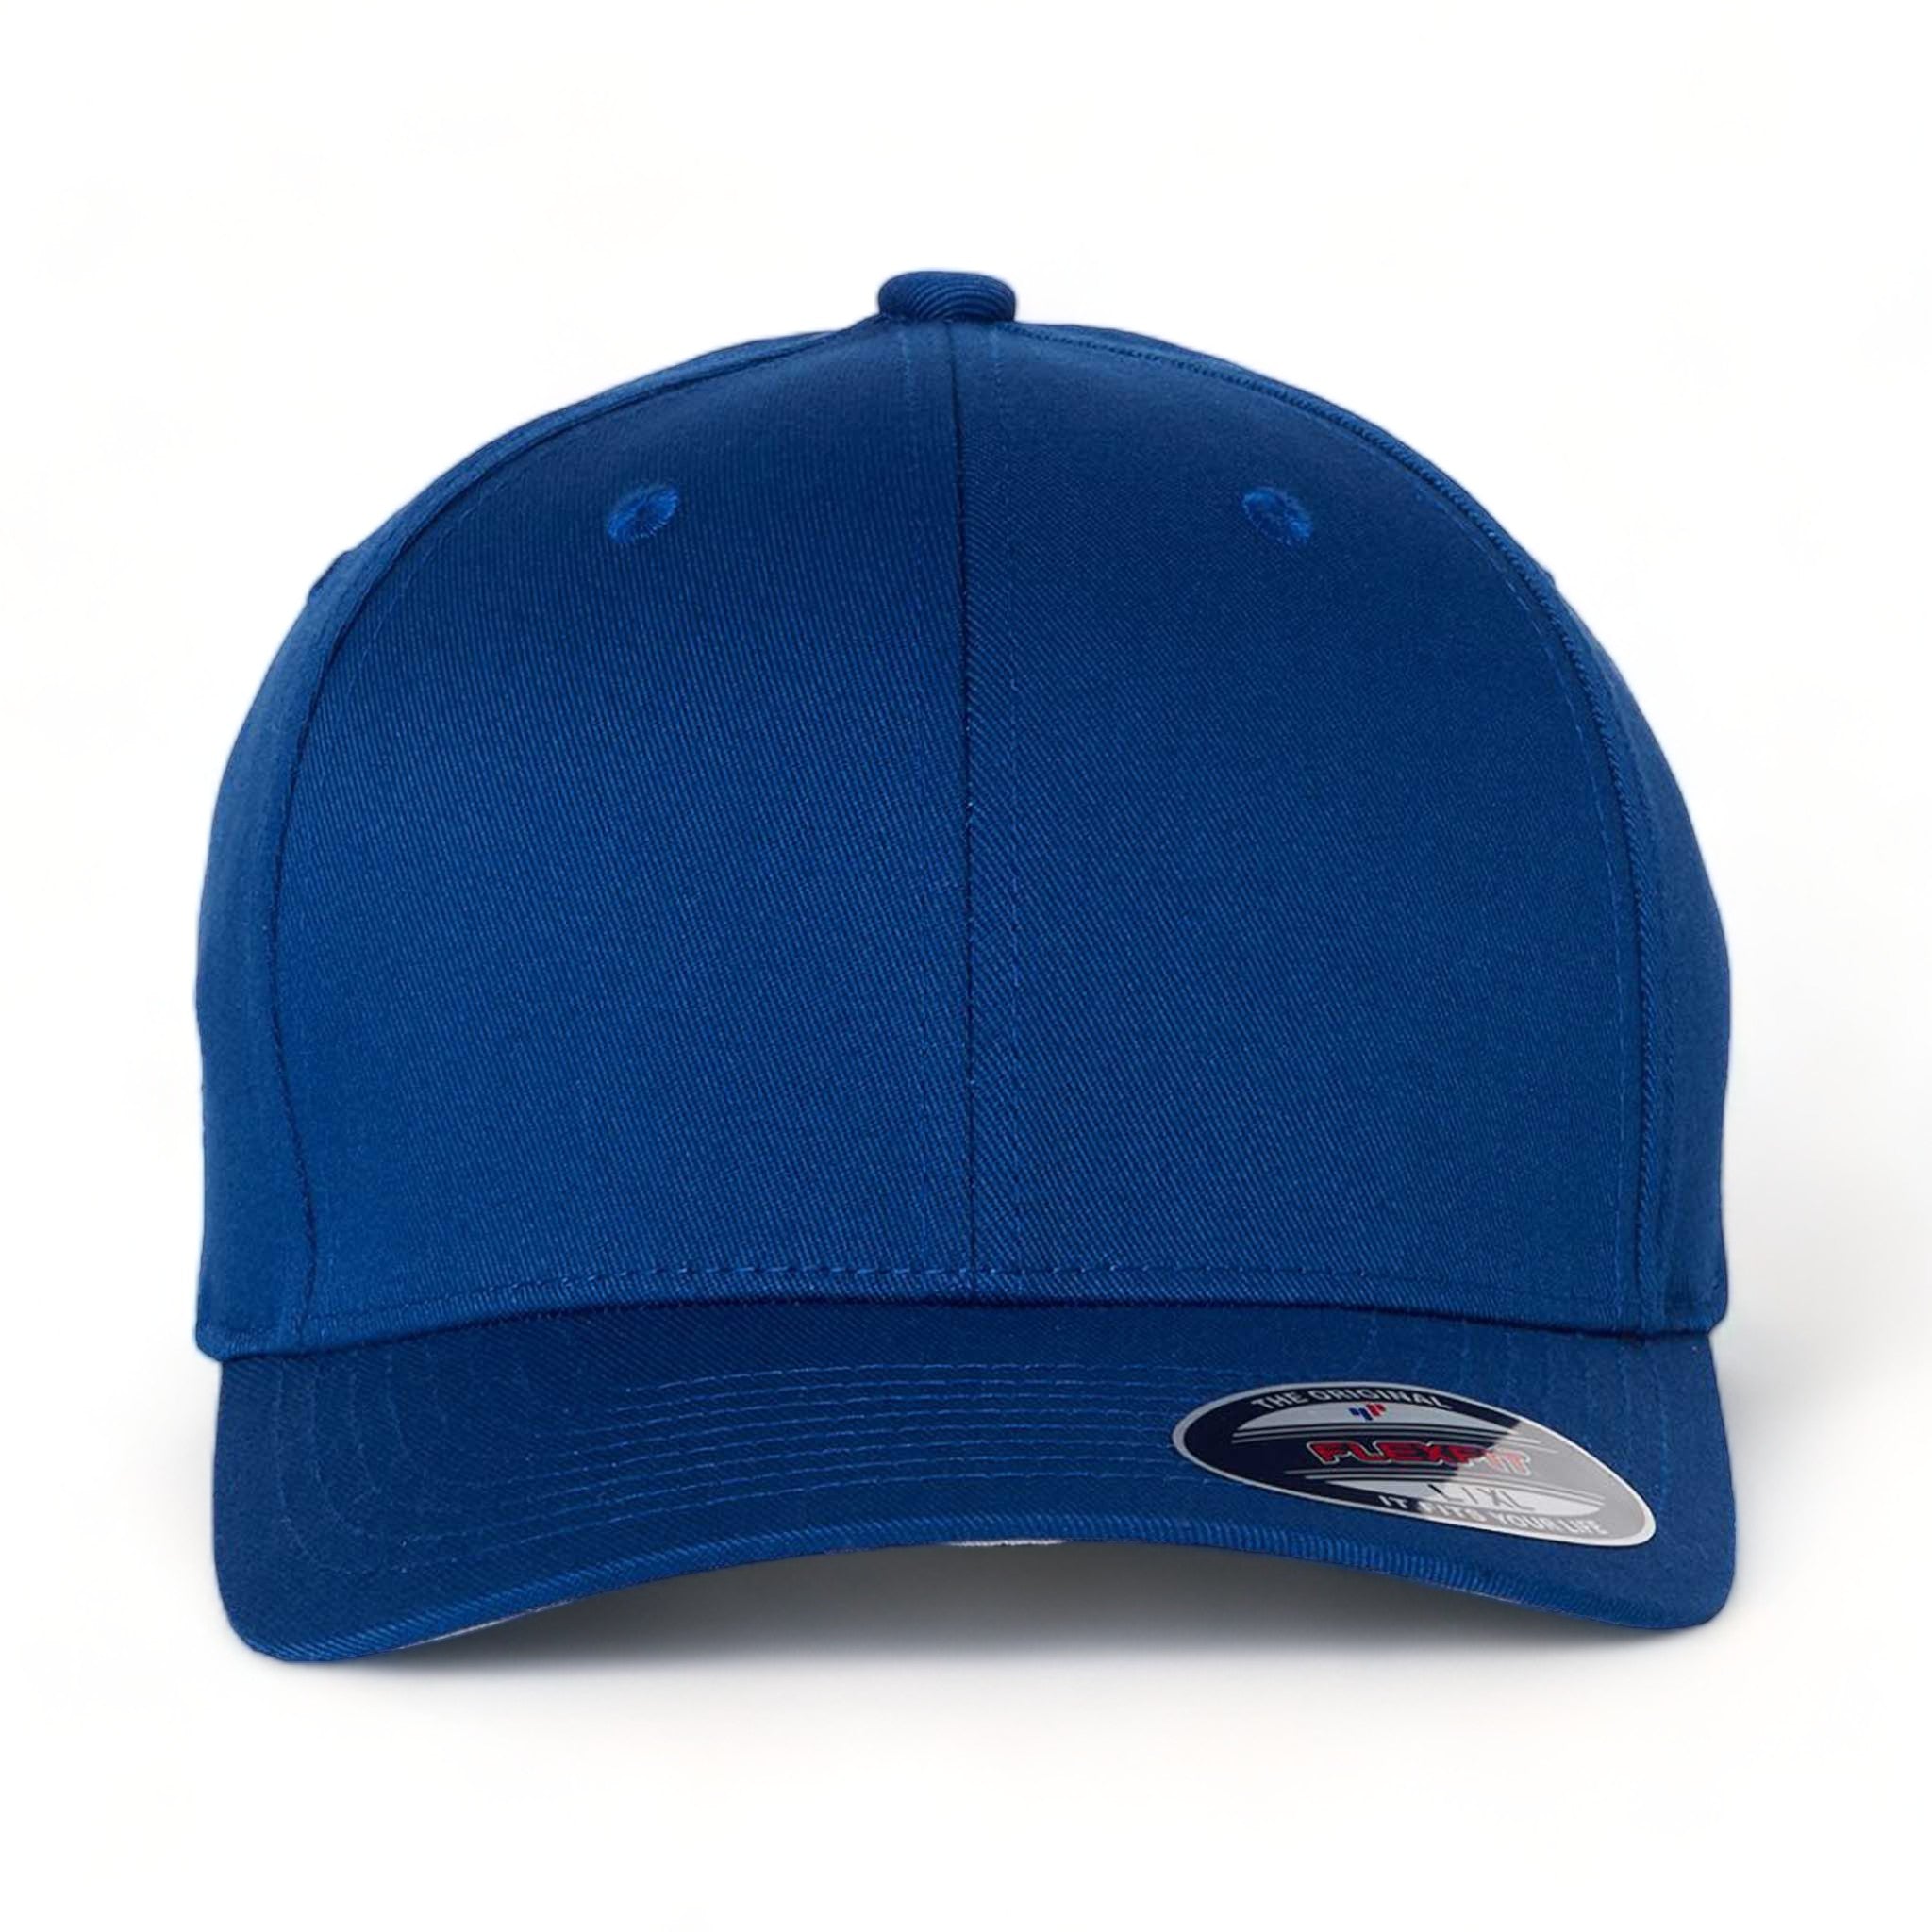 Front view of Flexfit 6277 custom hat in royal blue